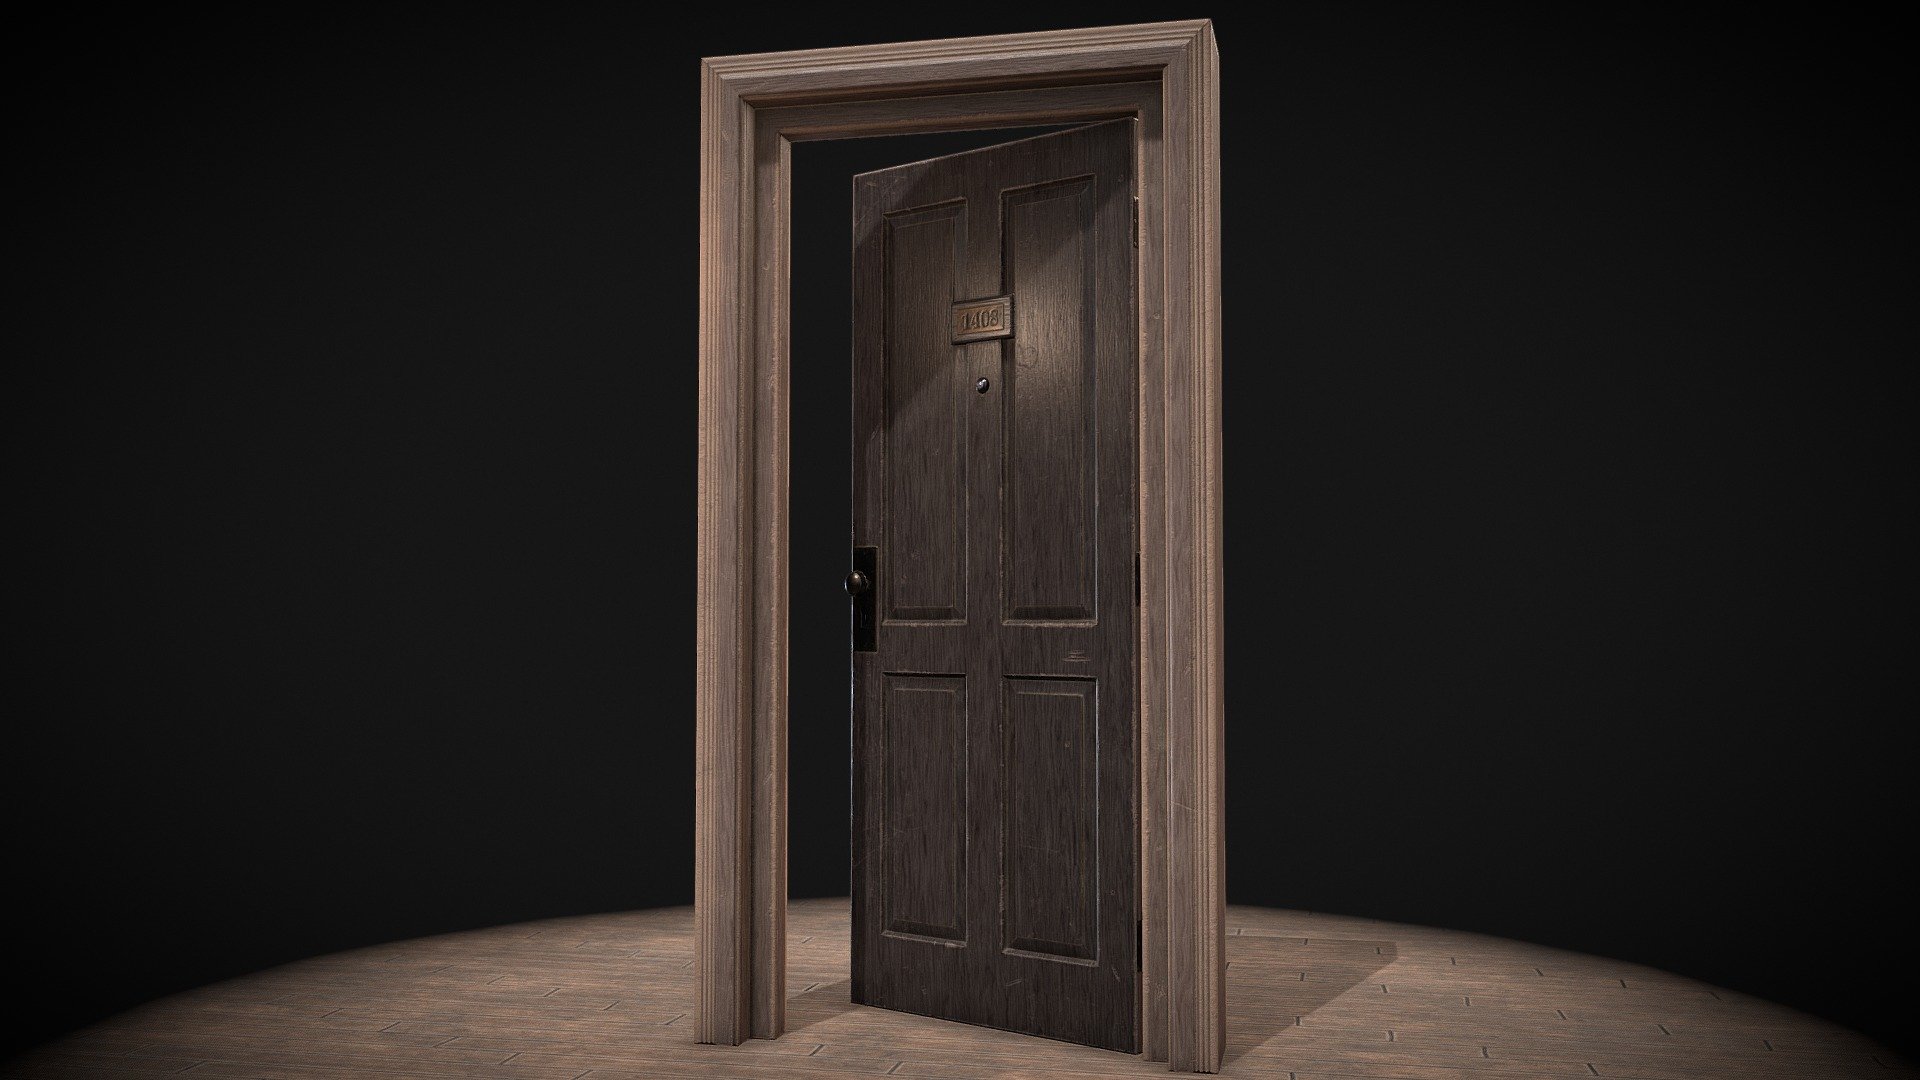 Door of the Room 1408 from the movie and book of the same name.

Model ready for animation.

Tris: 834

Textures: 4096x4096

Soft: 3DsMax, Zbrush, Substance Painter, Photoshop 

Follow on my Instagram and Artstation for more renders.
 - Old hotel door - Download Free 3D model by sergeilihandristov 3d model